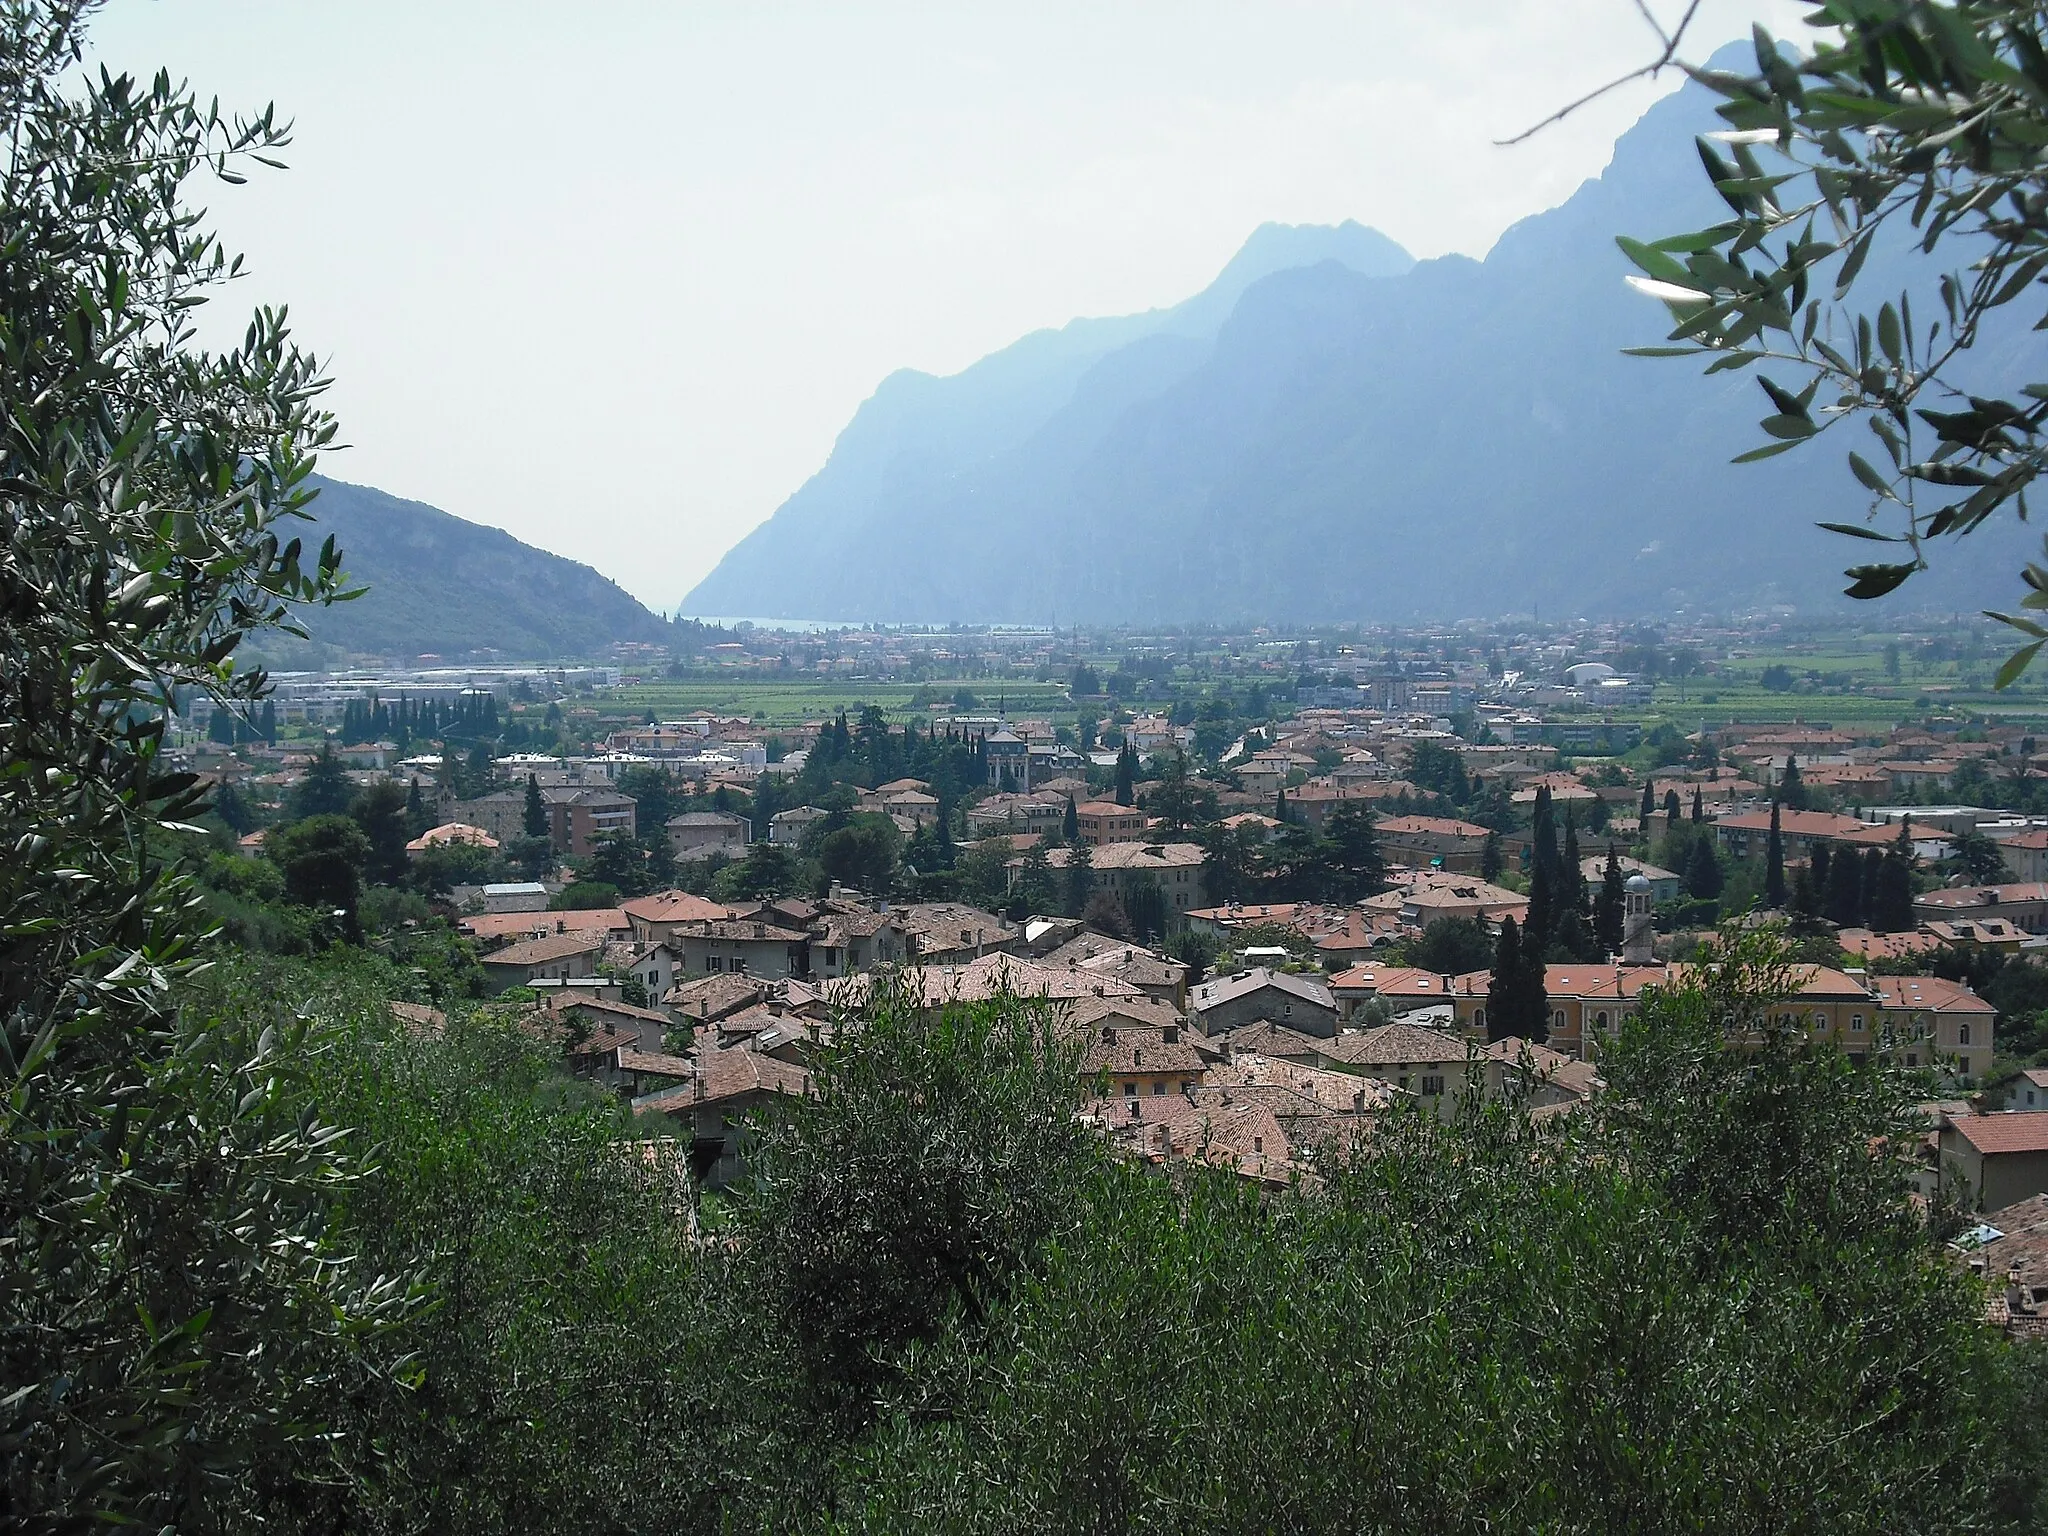 Image of Arco